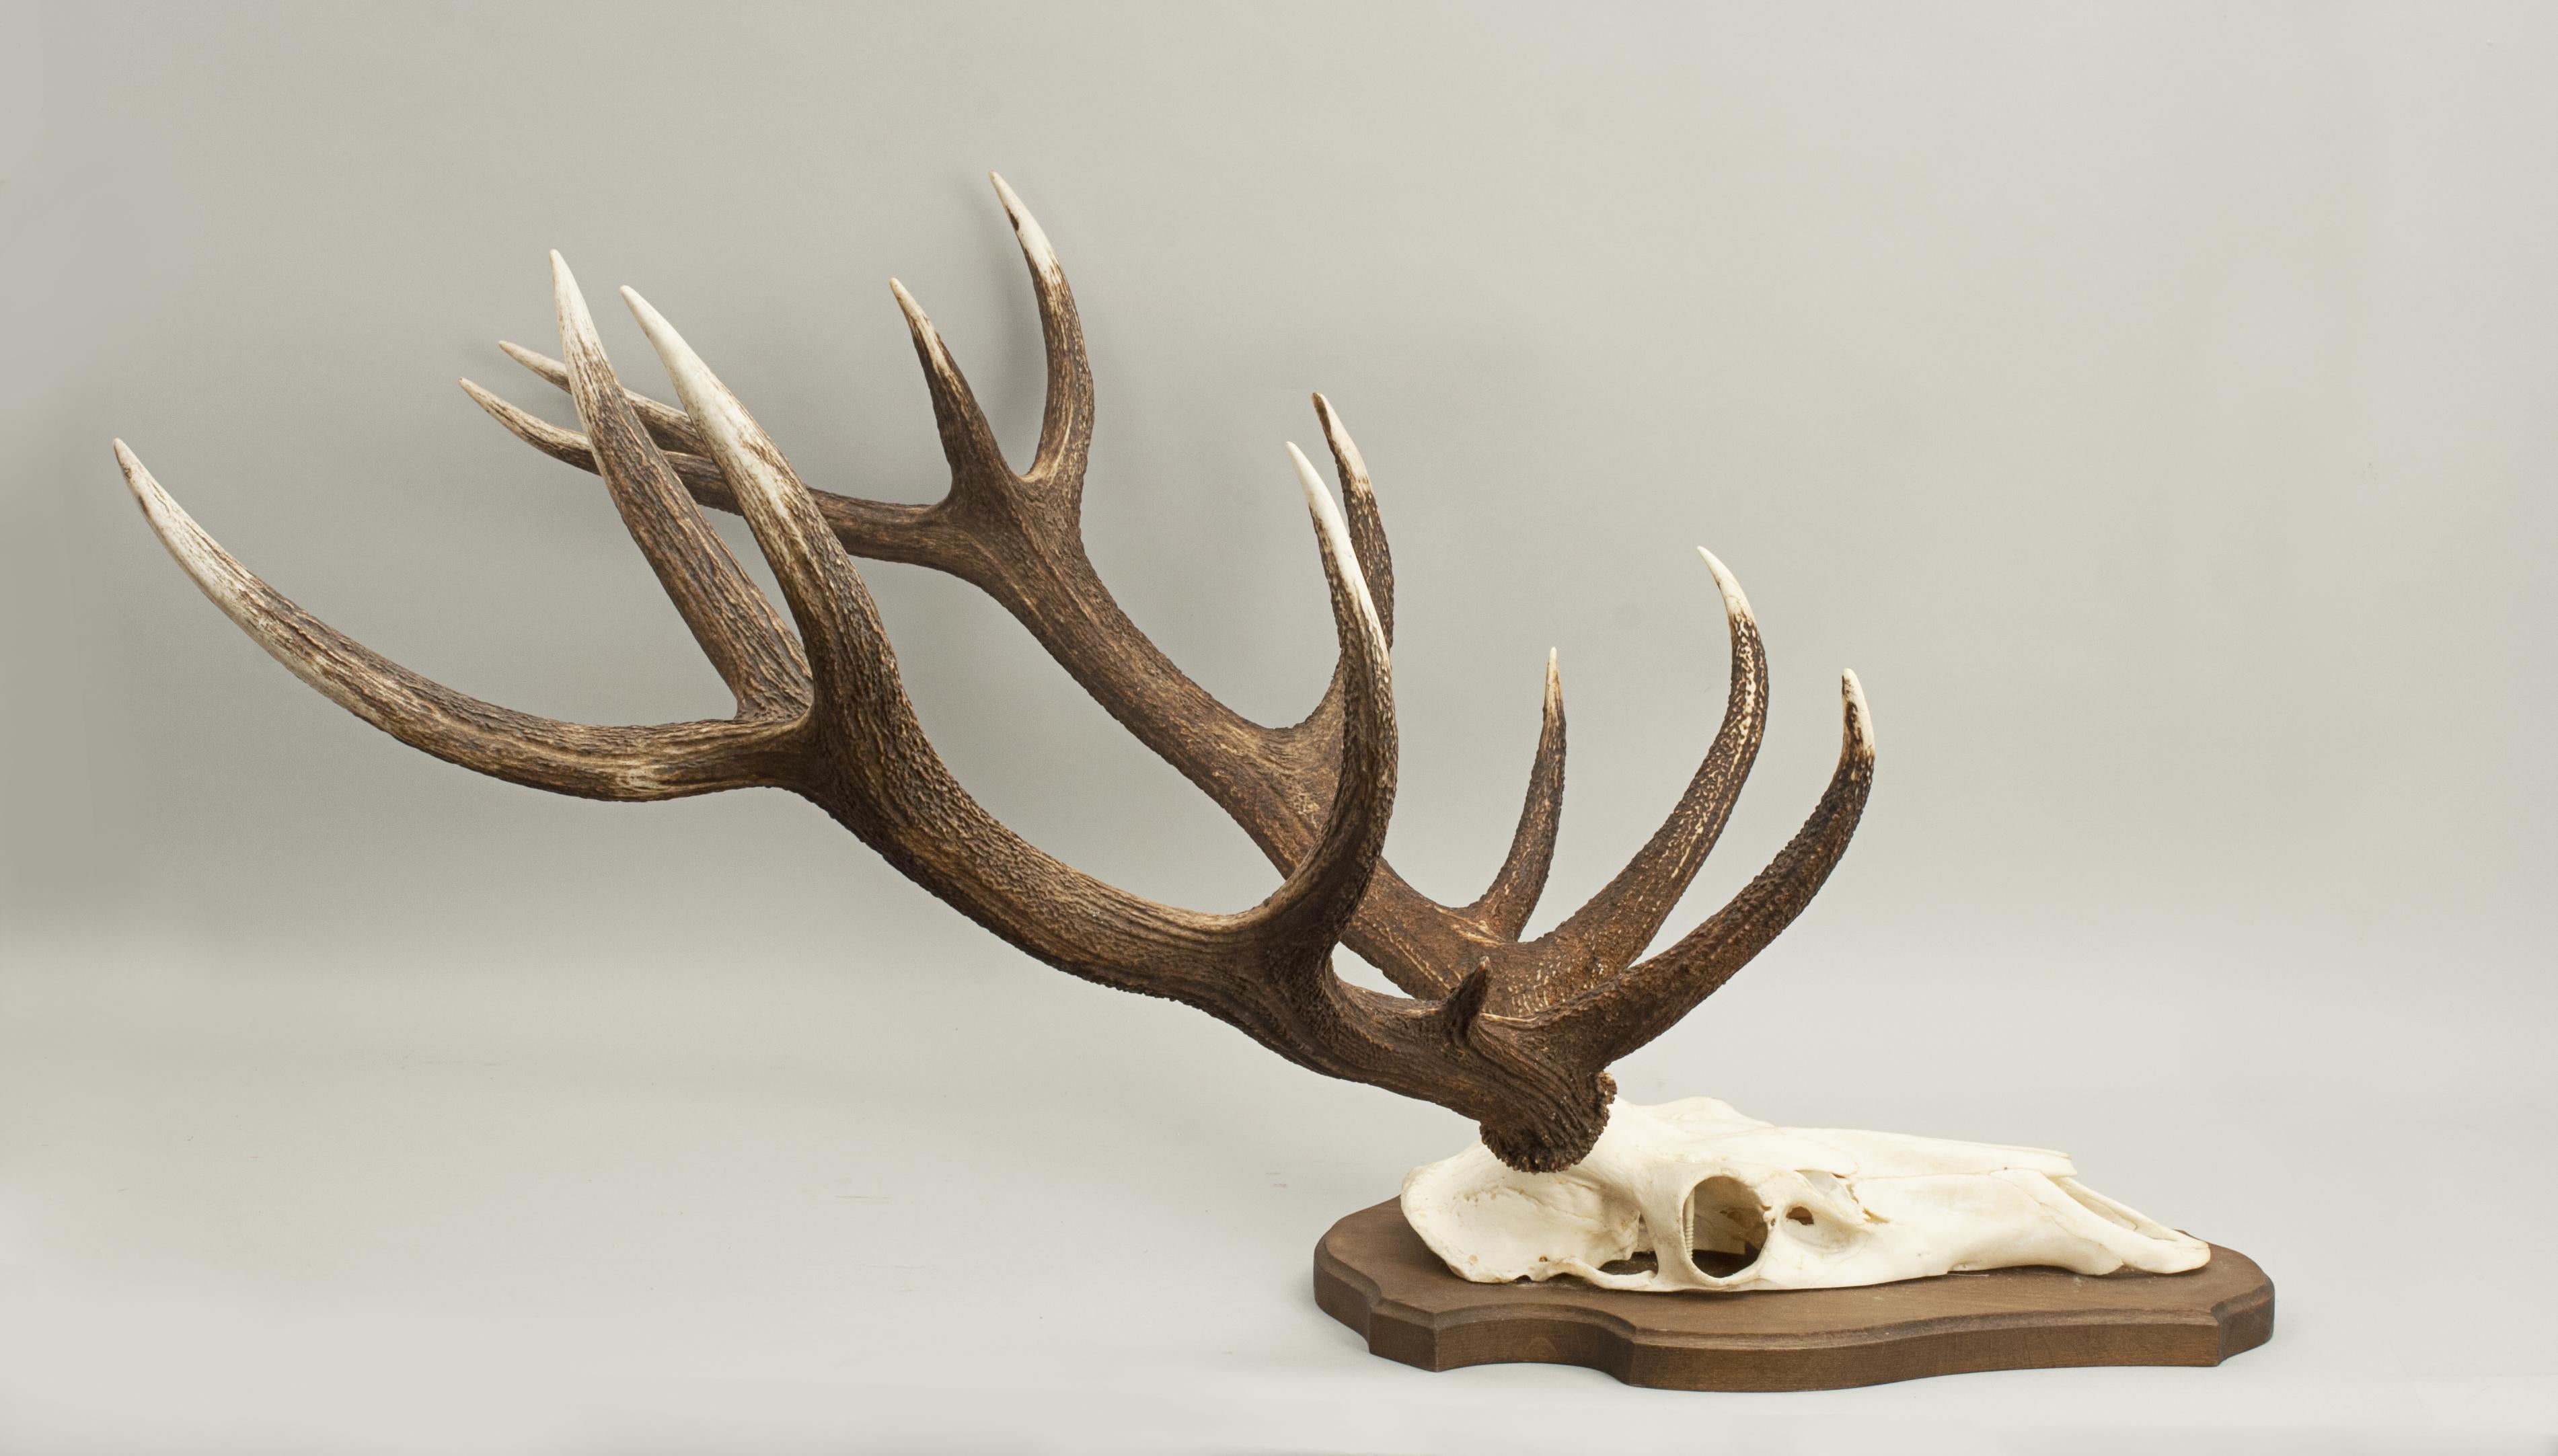 Red deer antlers.
A large pair of 12 point red deer antlers with skull cap, mounted onto a wooden plaque. The shield is made from oak with profile edges. These stag antlers are an excellent wall display.

The red deer (Cervus elaphus), or red